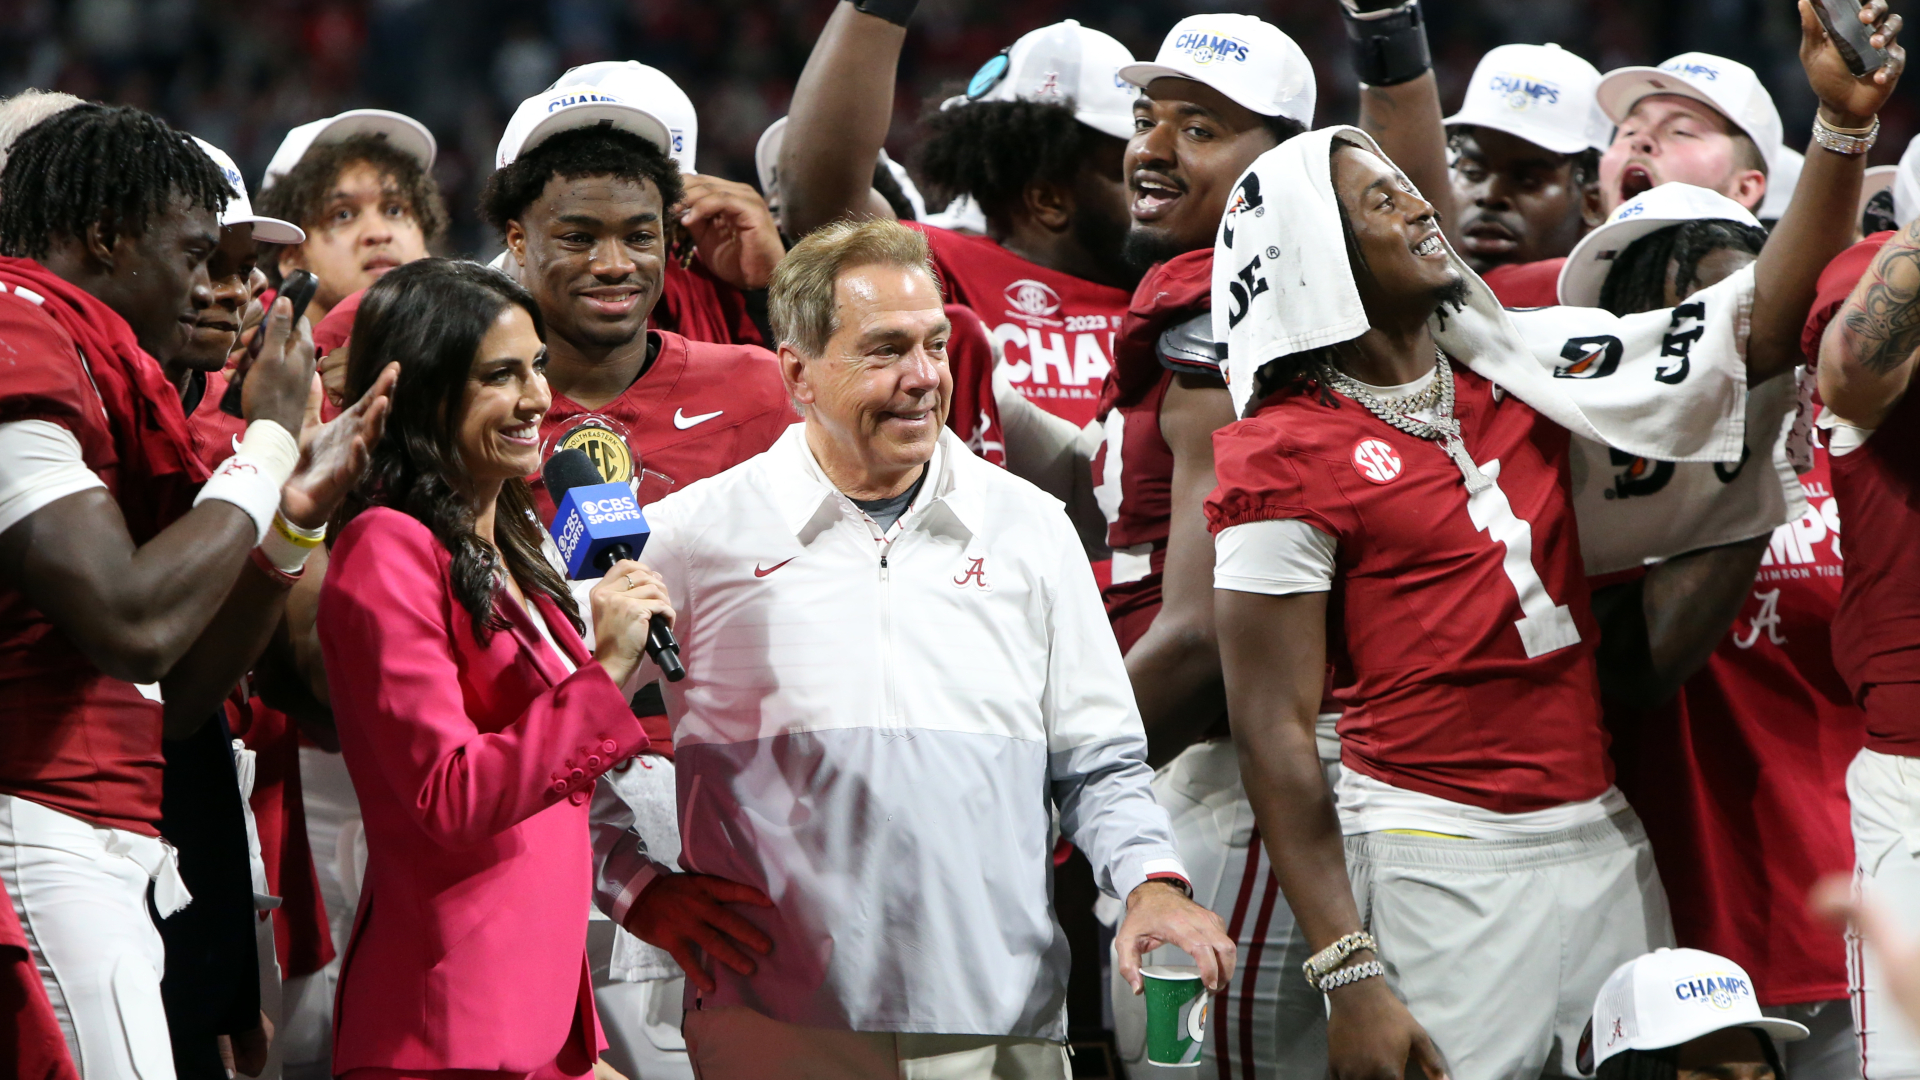 College Football Playoff Spots Revealed: Alabama Squeaks Into No. 4
Seed